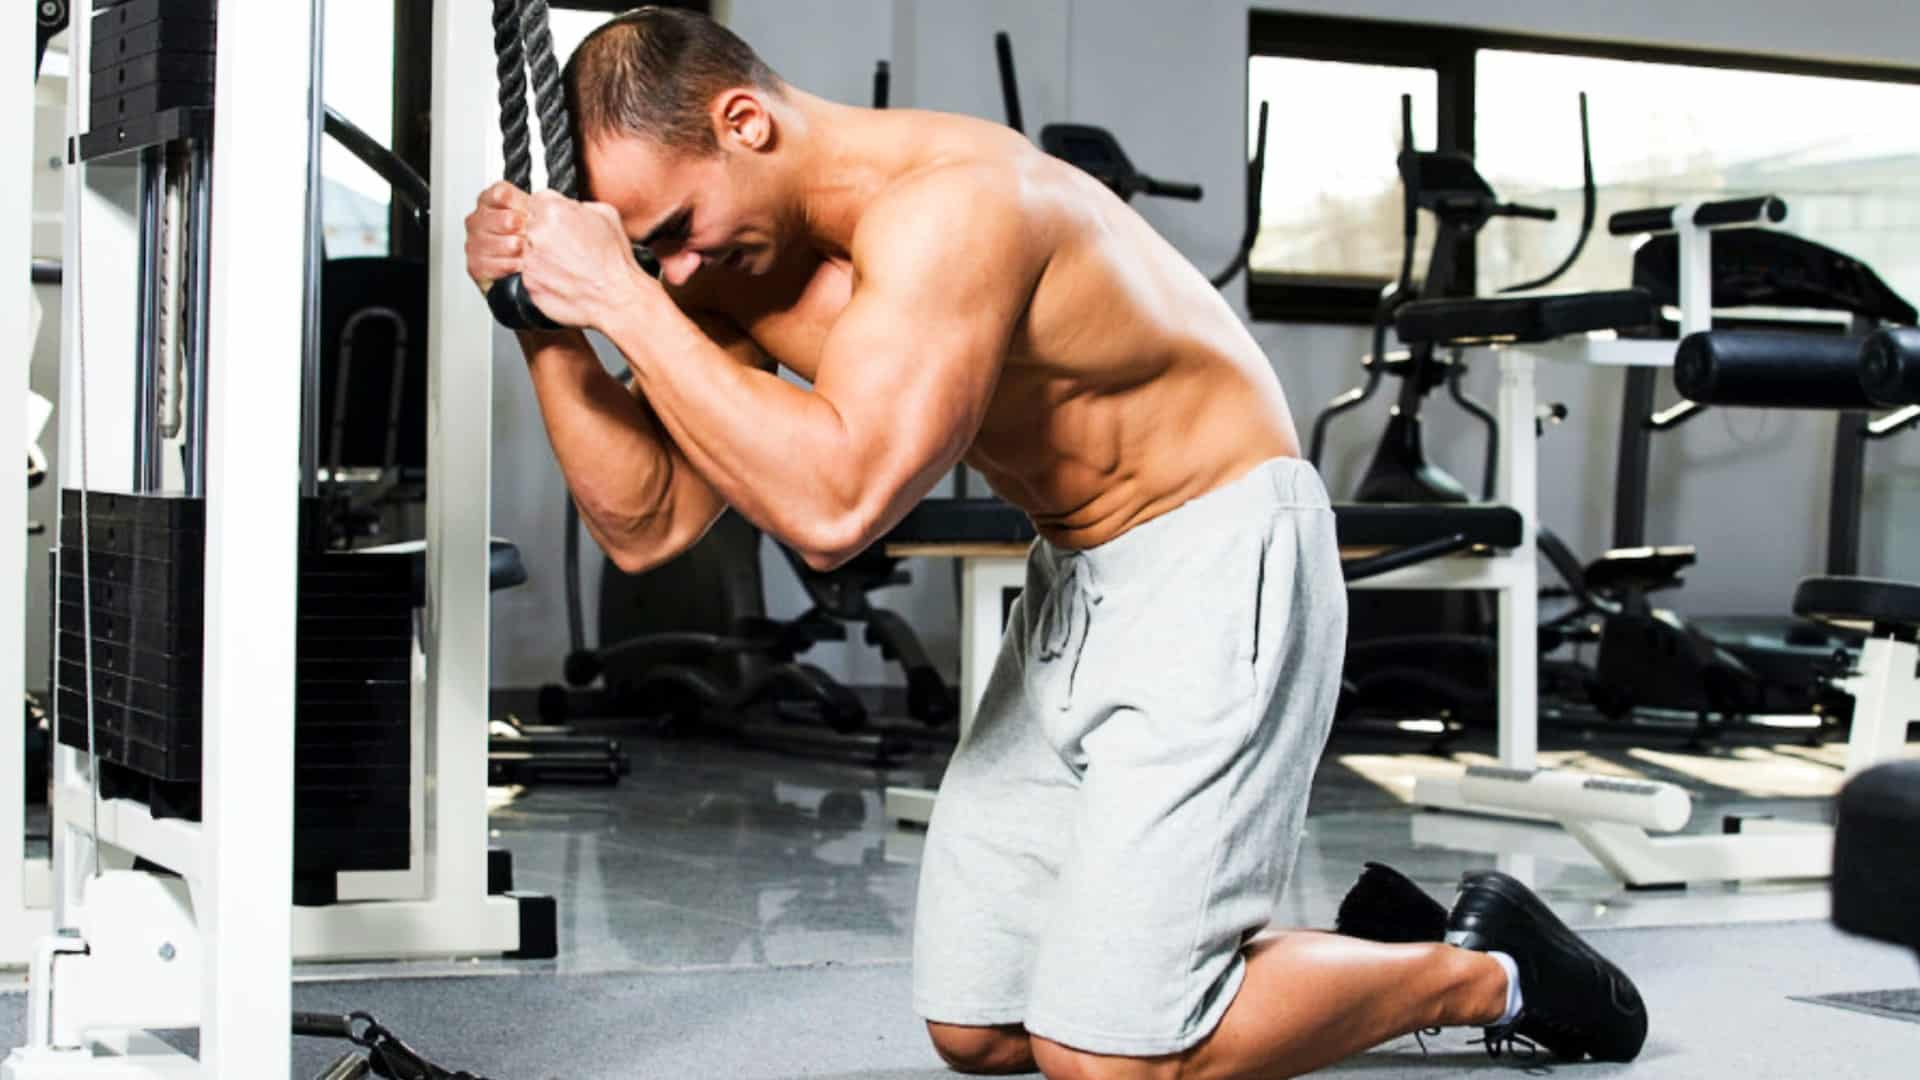 Best Cable Abs And Oblique Exercises To Build Strong Core